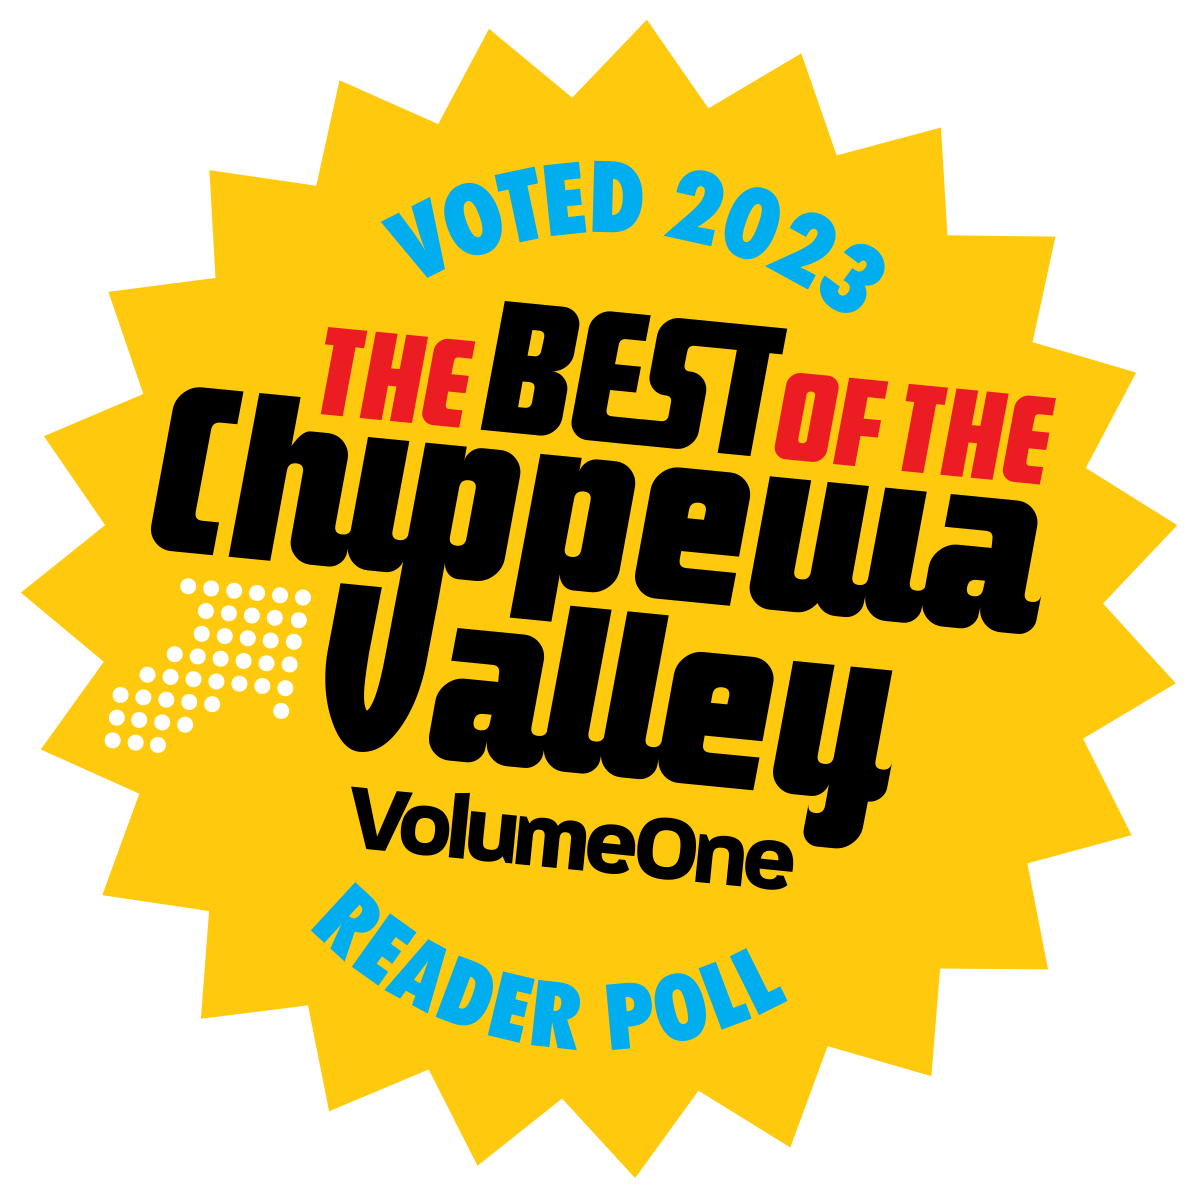 the best of the chippewa valley